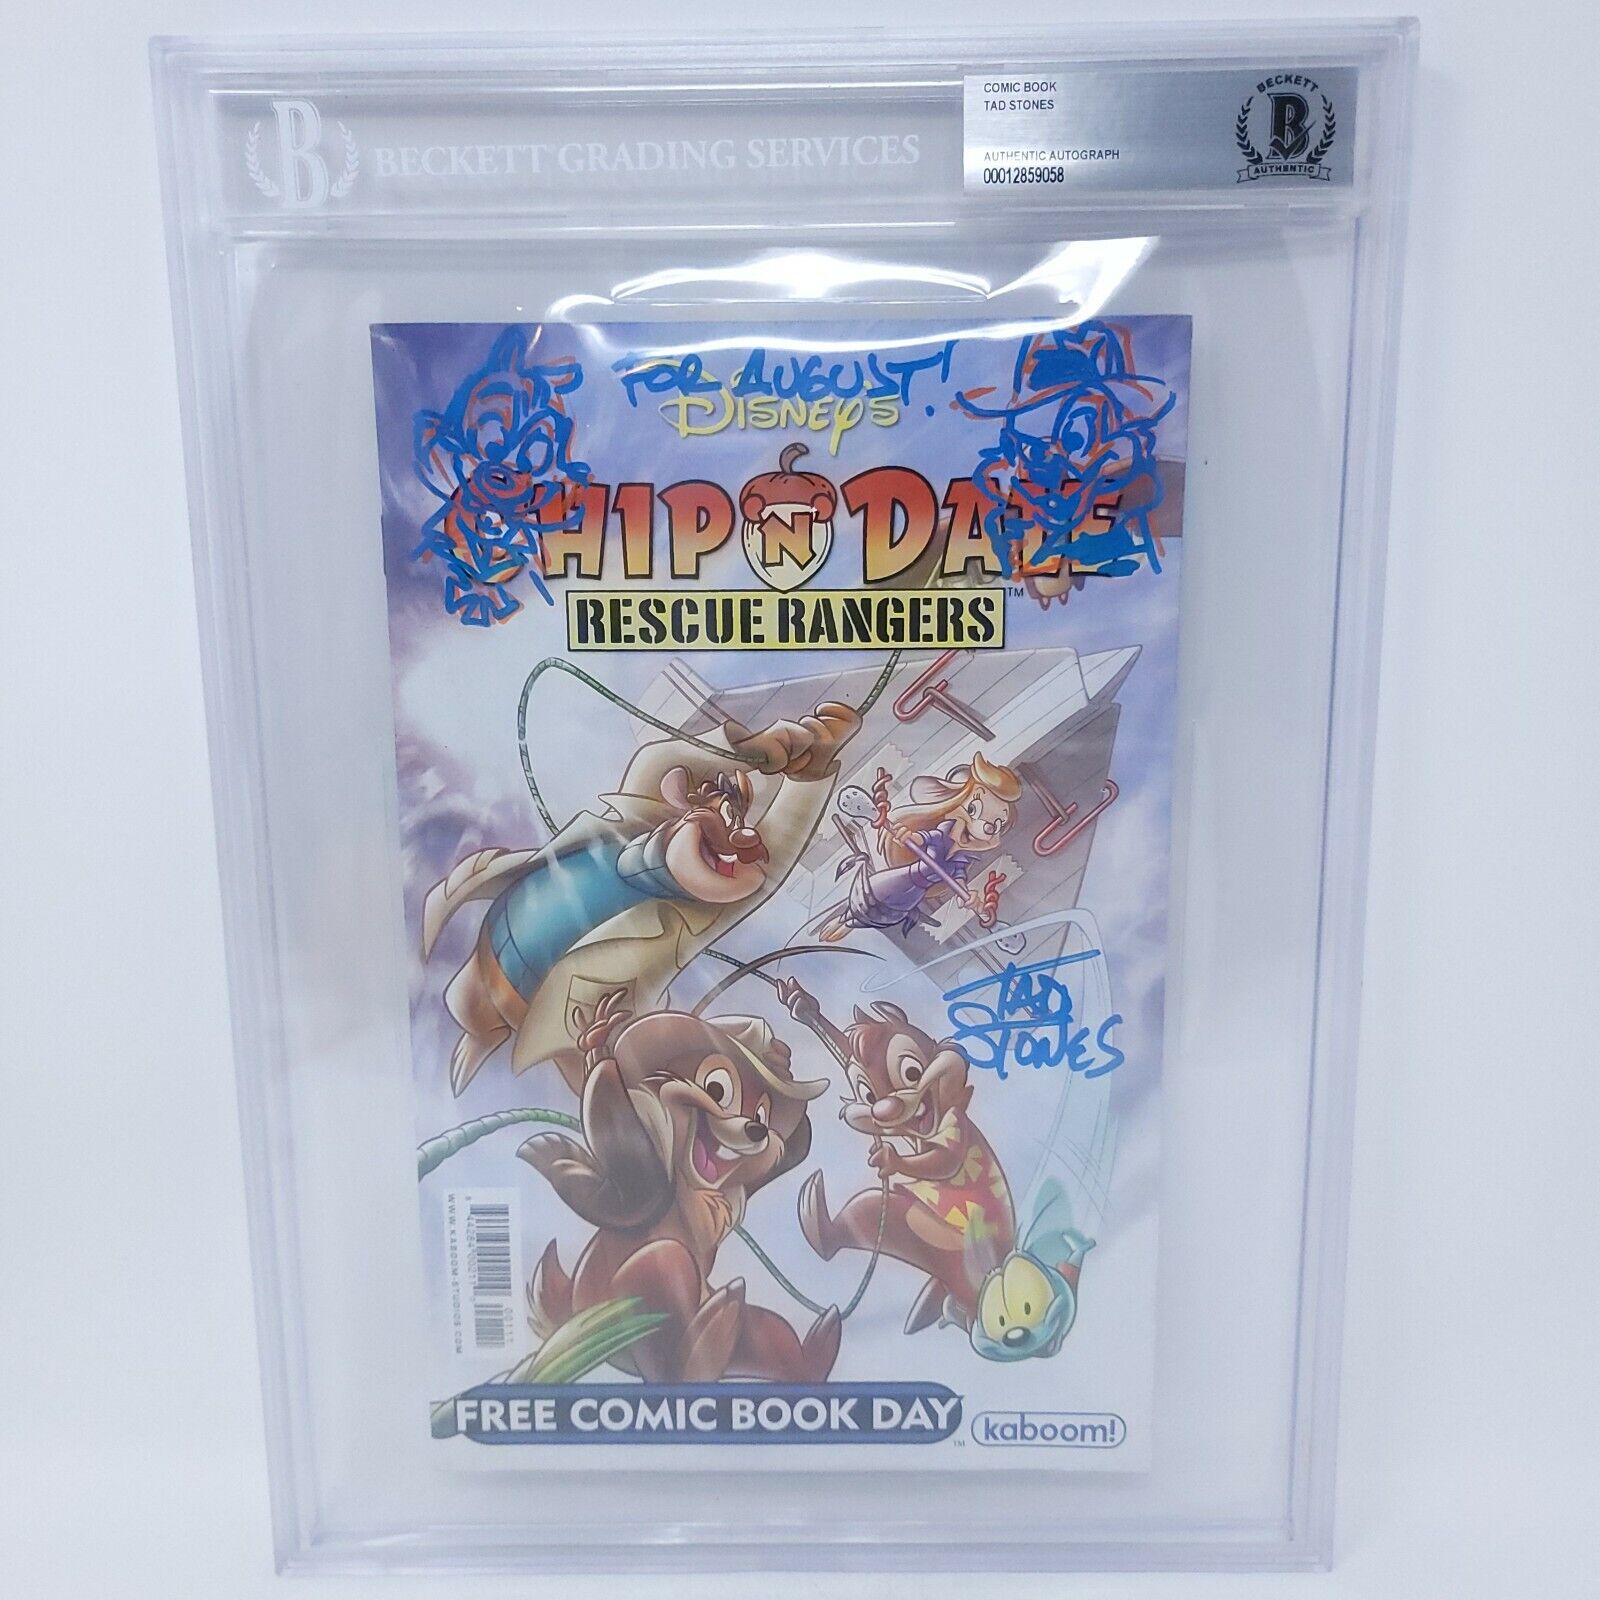 Tad Stones Signed Comic Book Chip and Dale\'s Rescue Rangers Beckett Slabbed